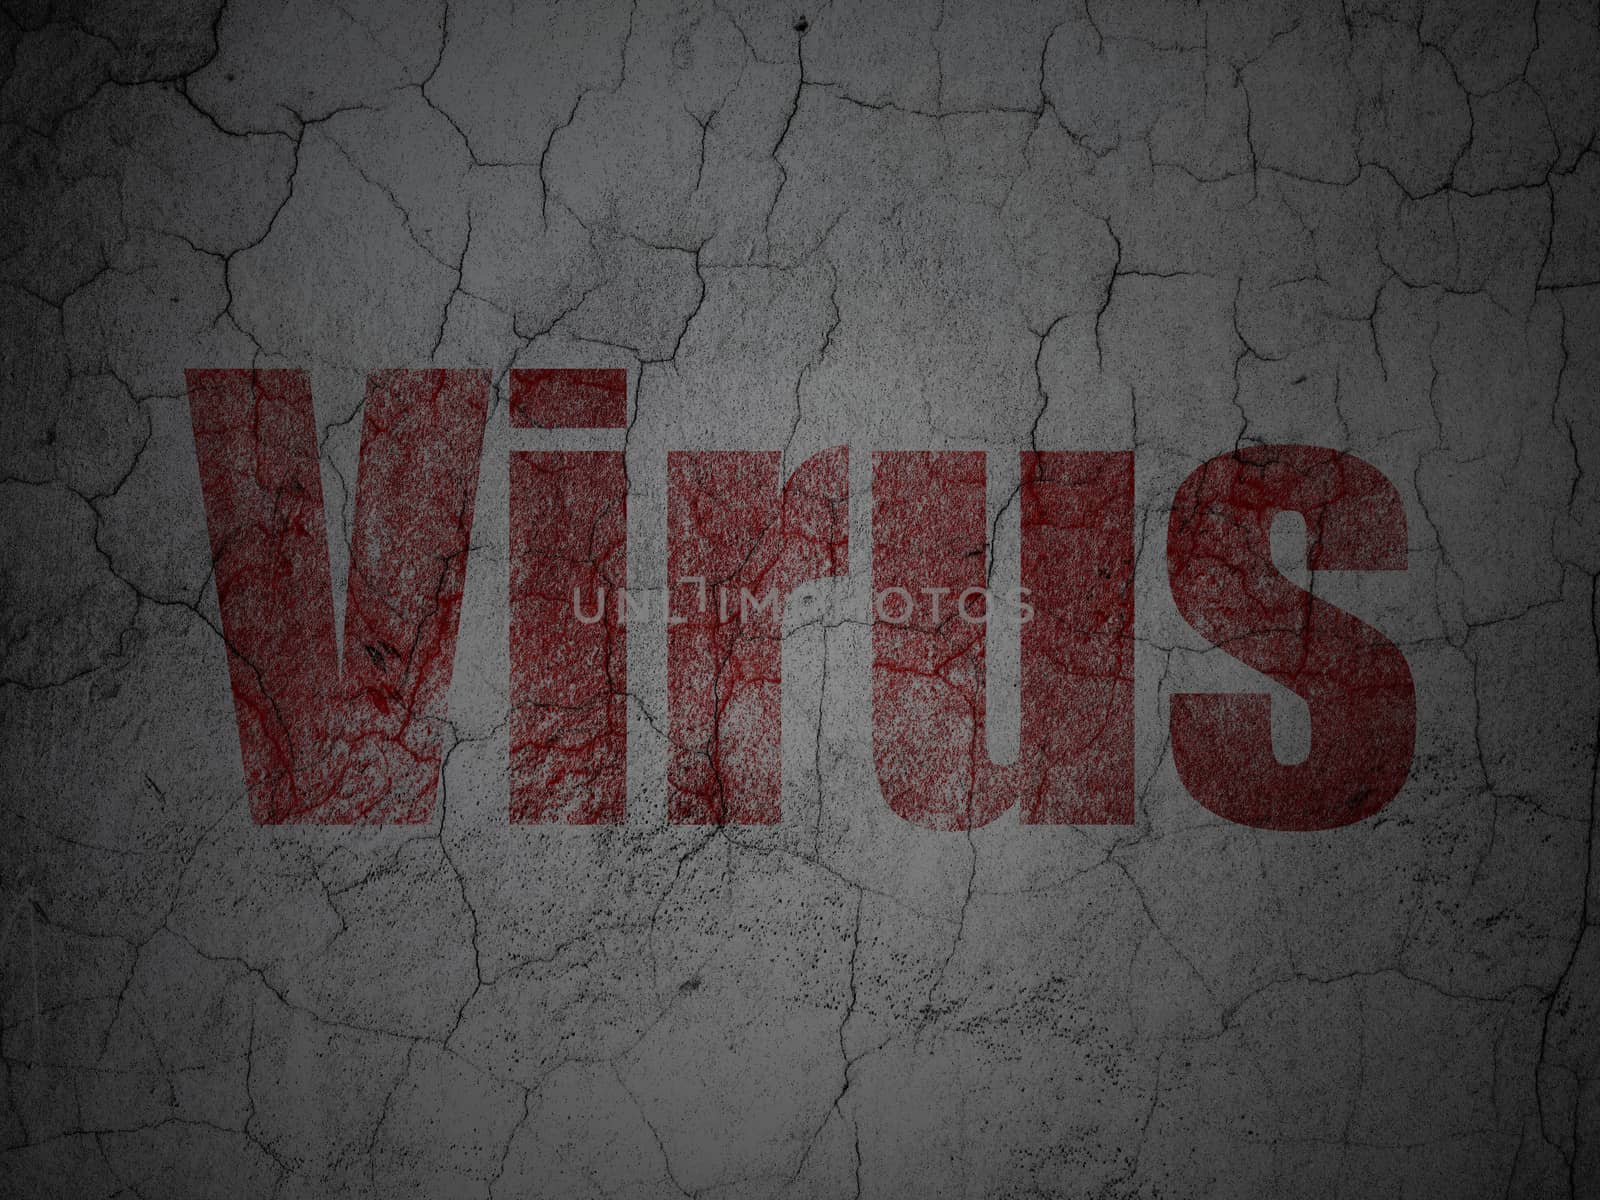 Privacy concept: Red Virus on grunge textured concrete wall background, 3d render